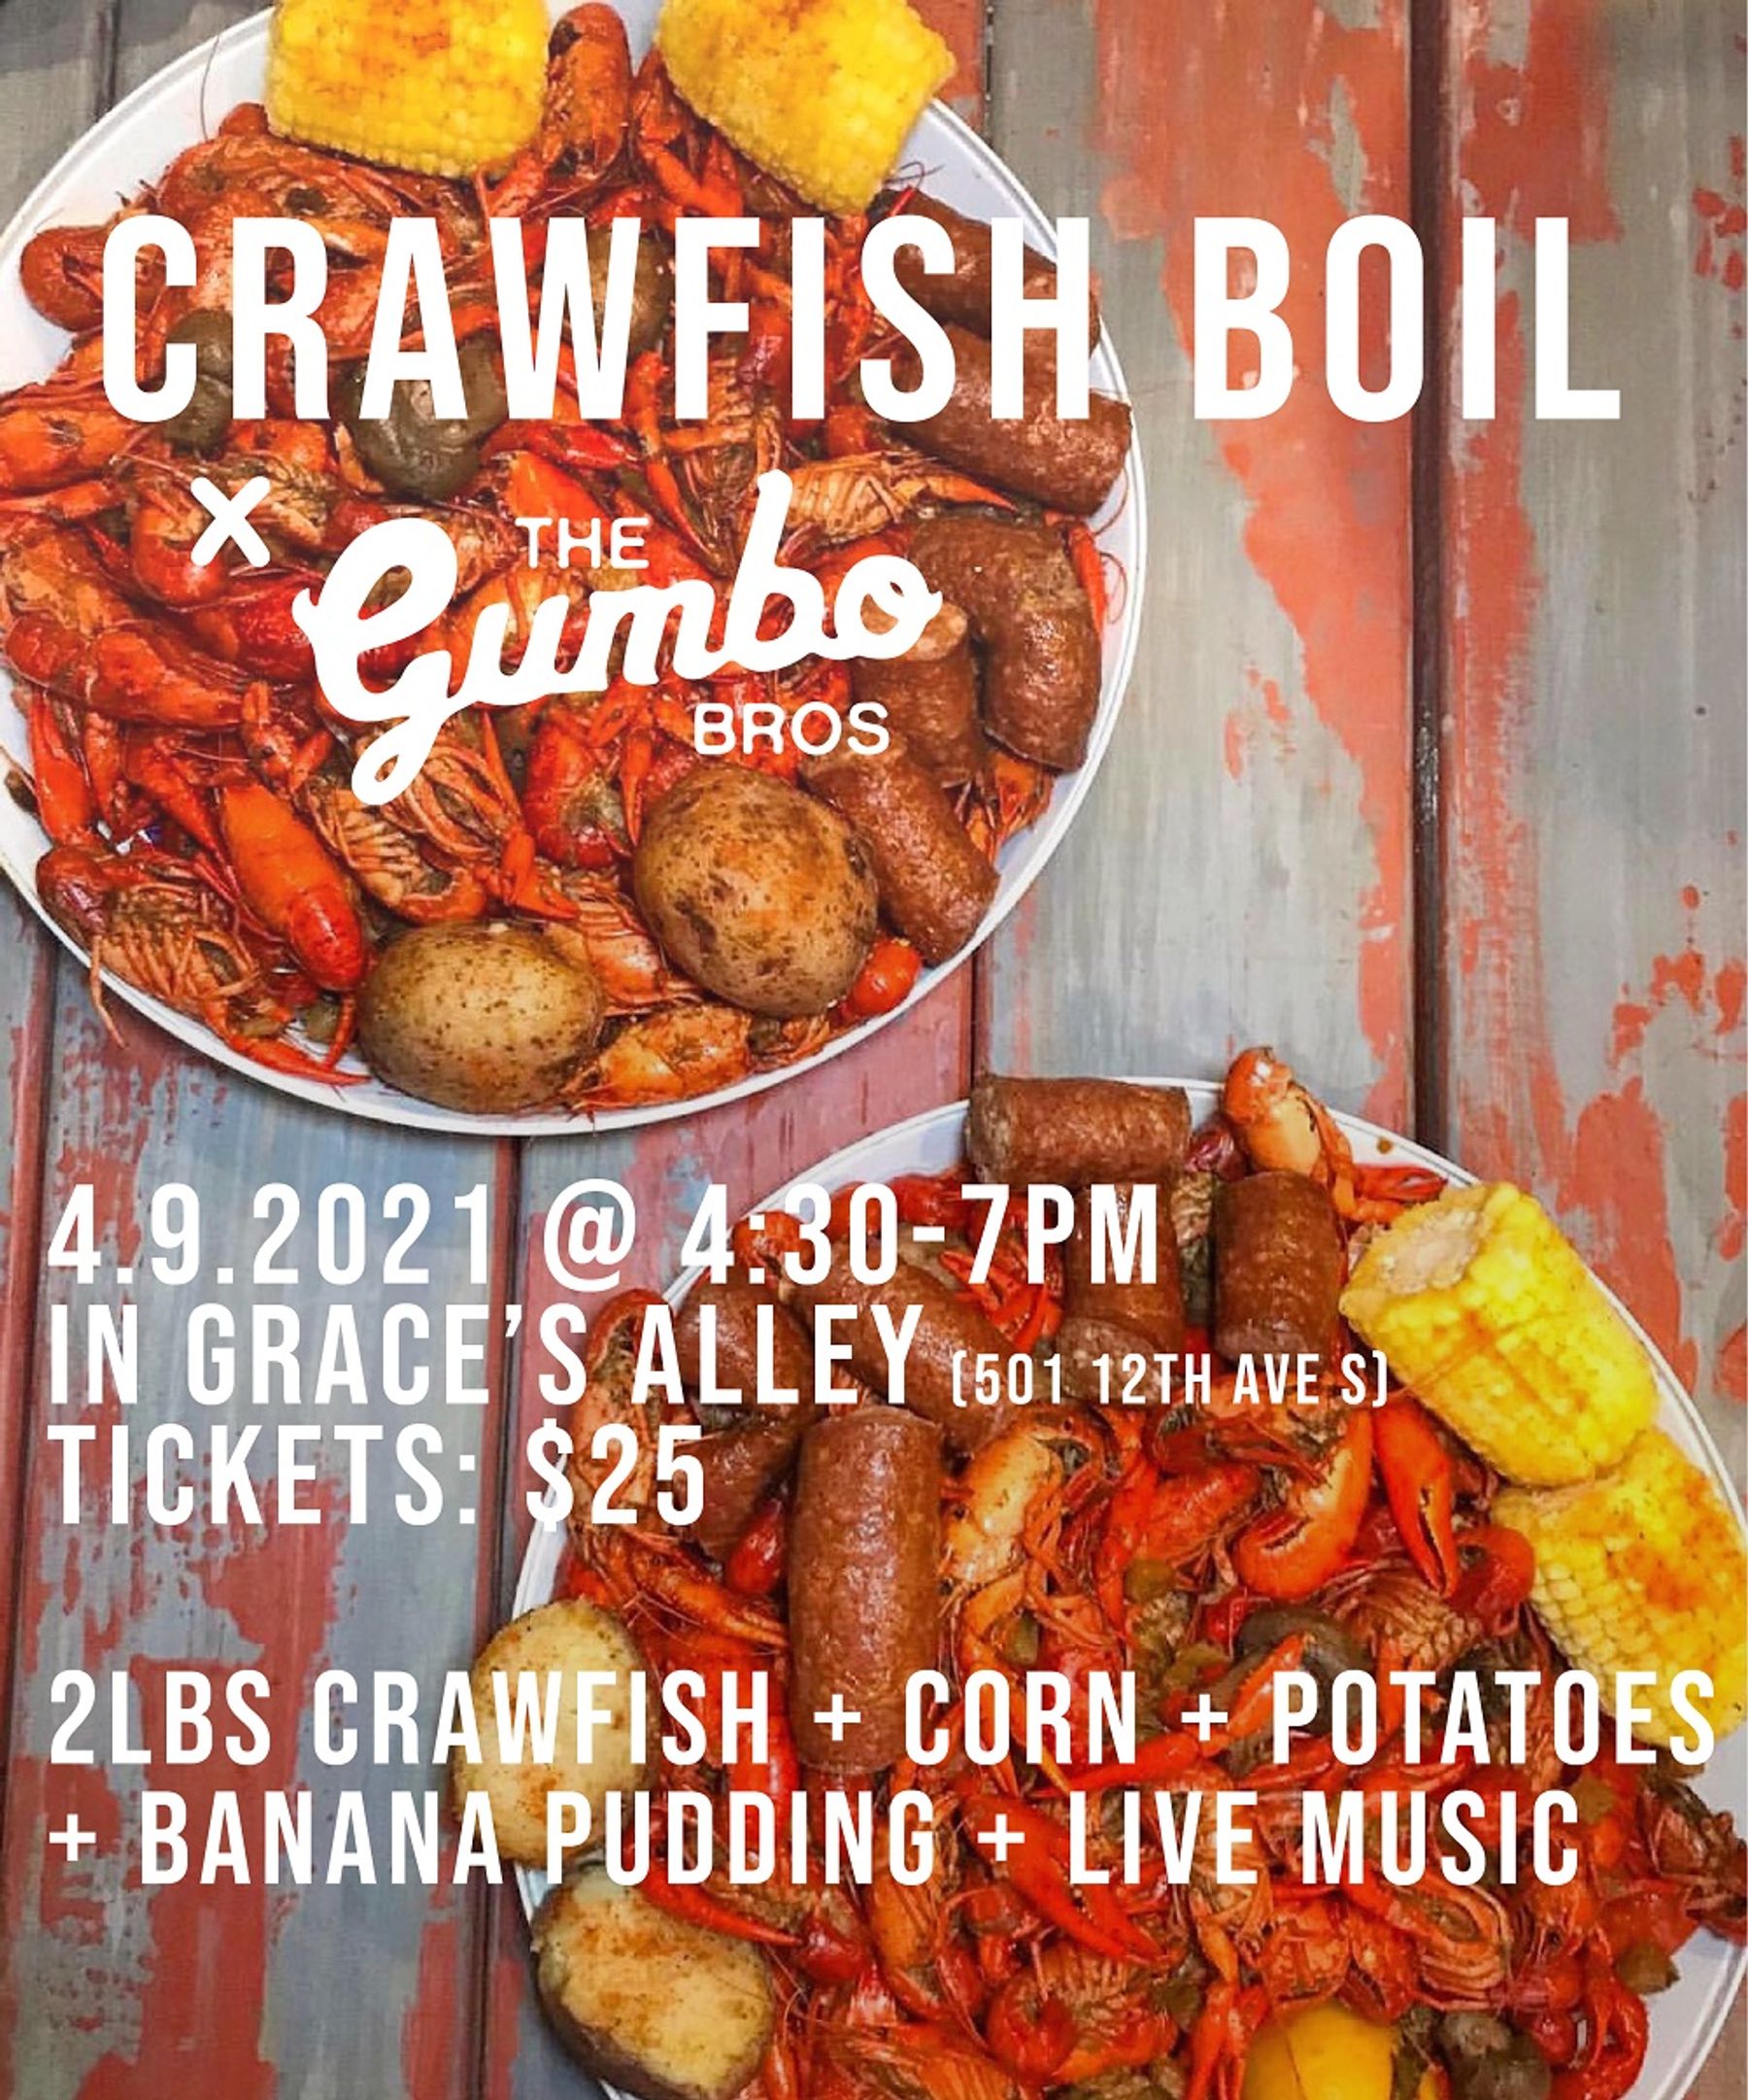 Crawfish Boil in Grace's Alley with Gumbo Bros Downtown Nashville